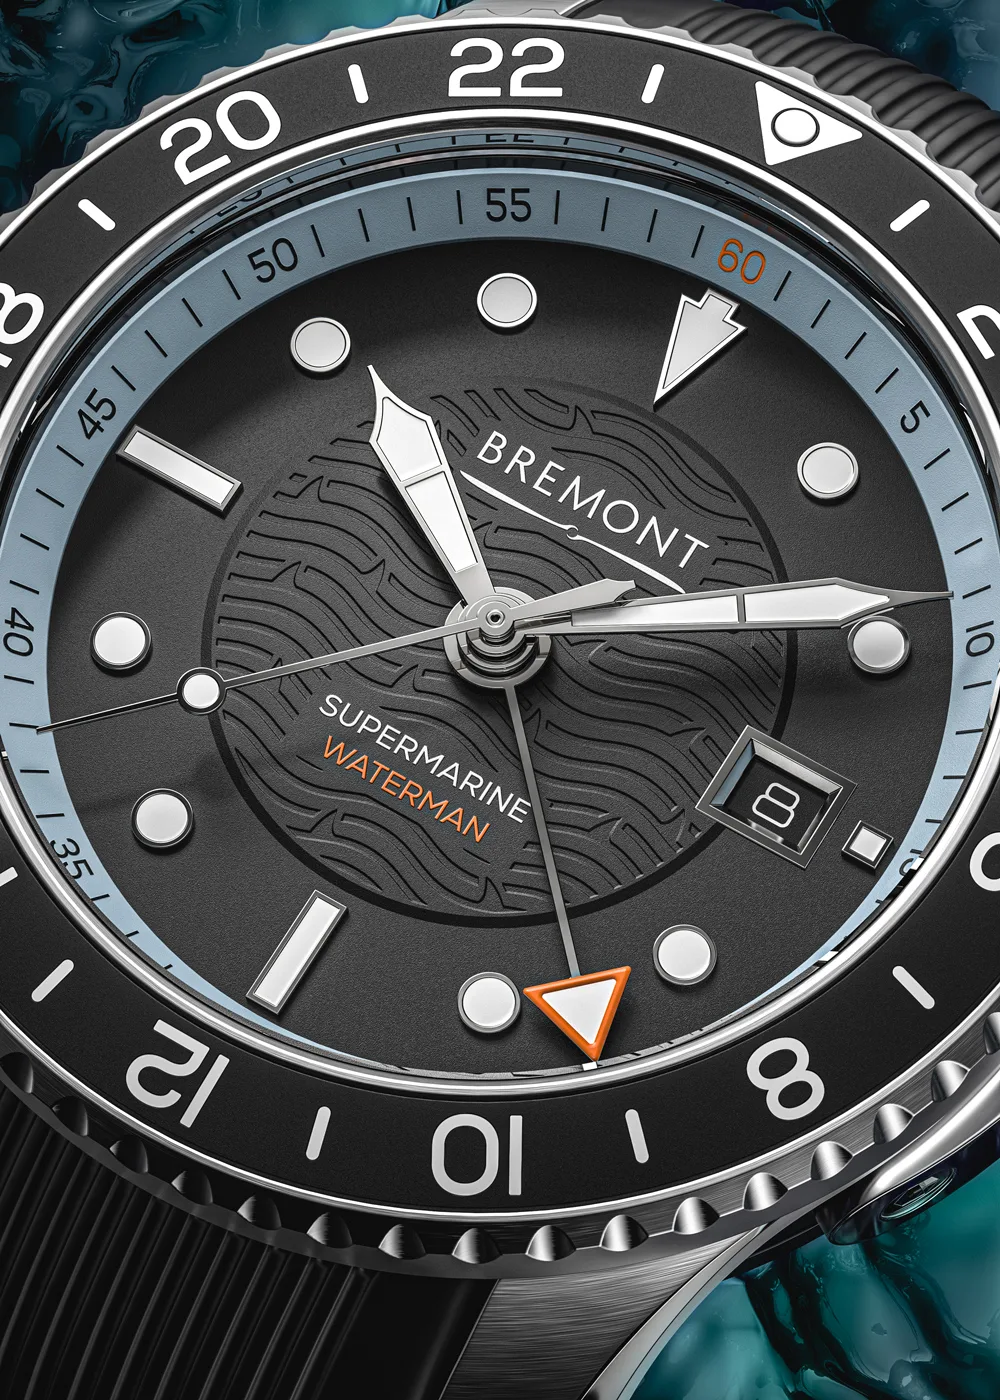 Close-up of Bremont Waterman watch